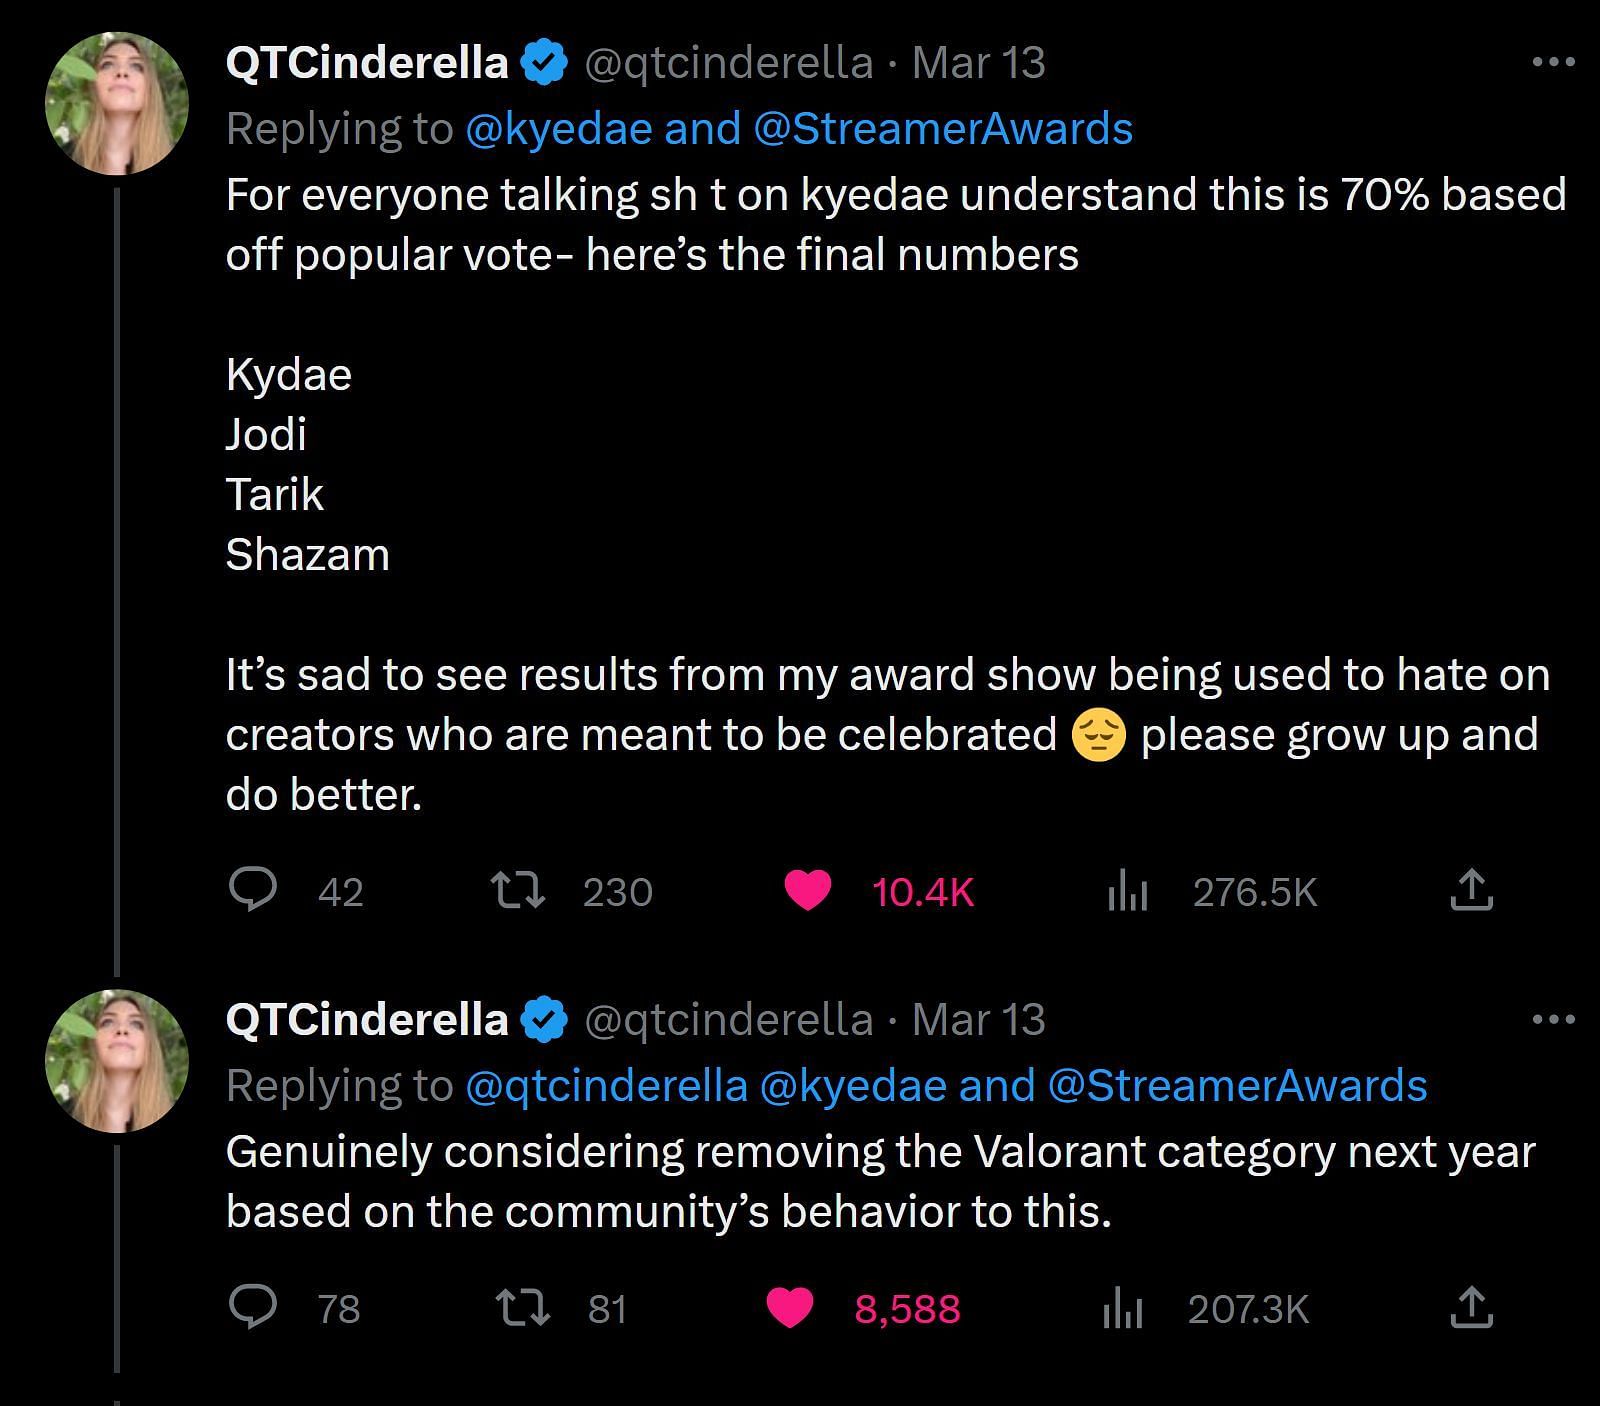 You Guys Killed It! - Fans Overwhelm QTCinderella With Kind Messages After  The Streamer Awards 2022 - EssentiallySports